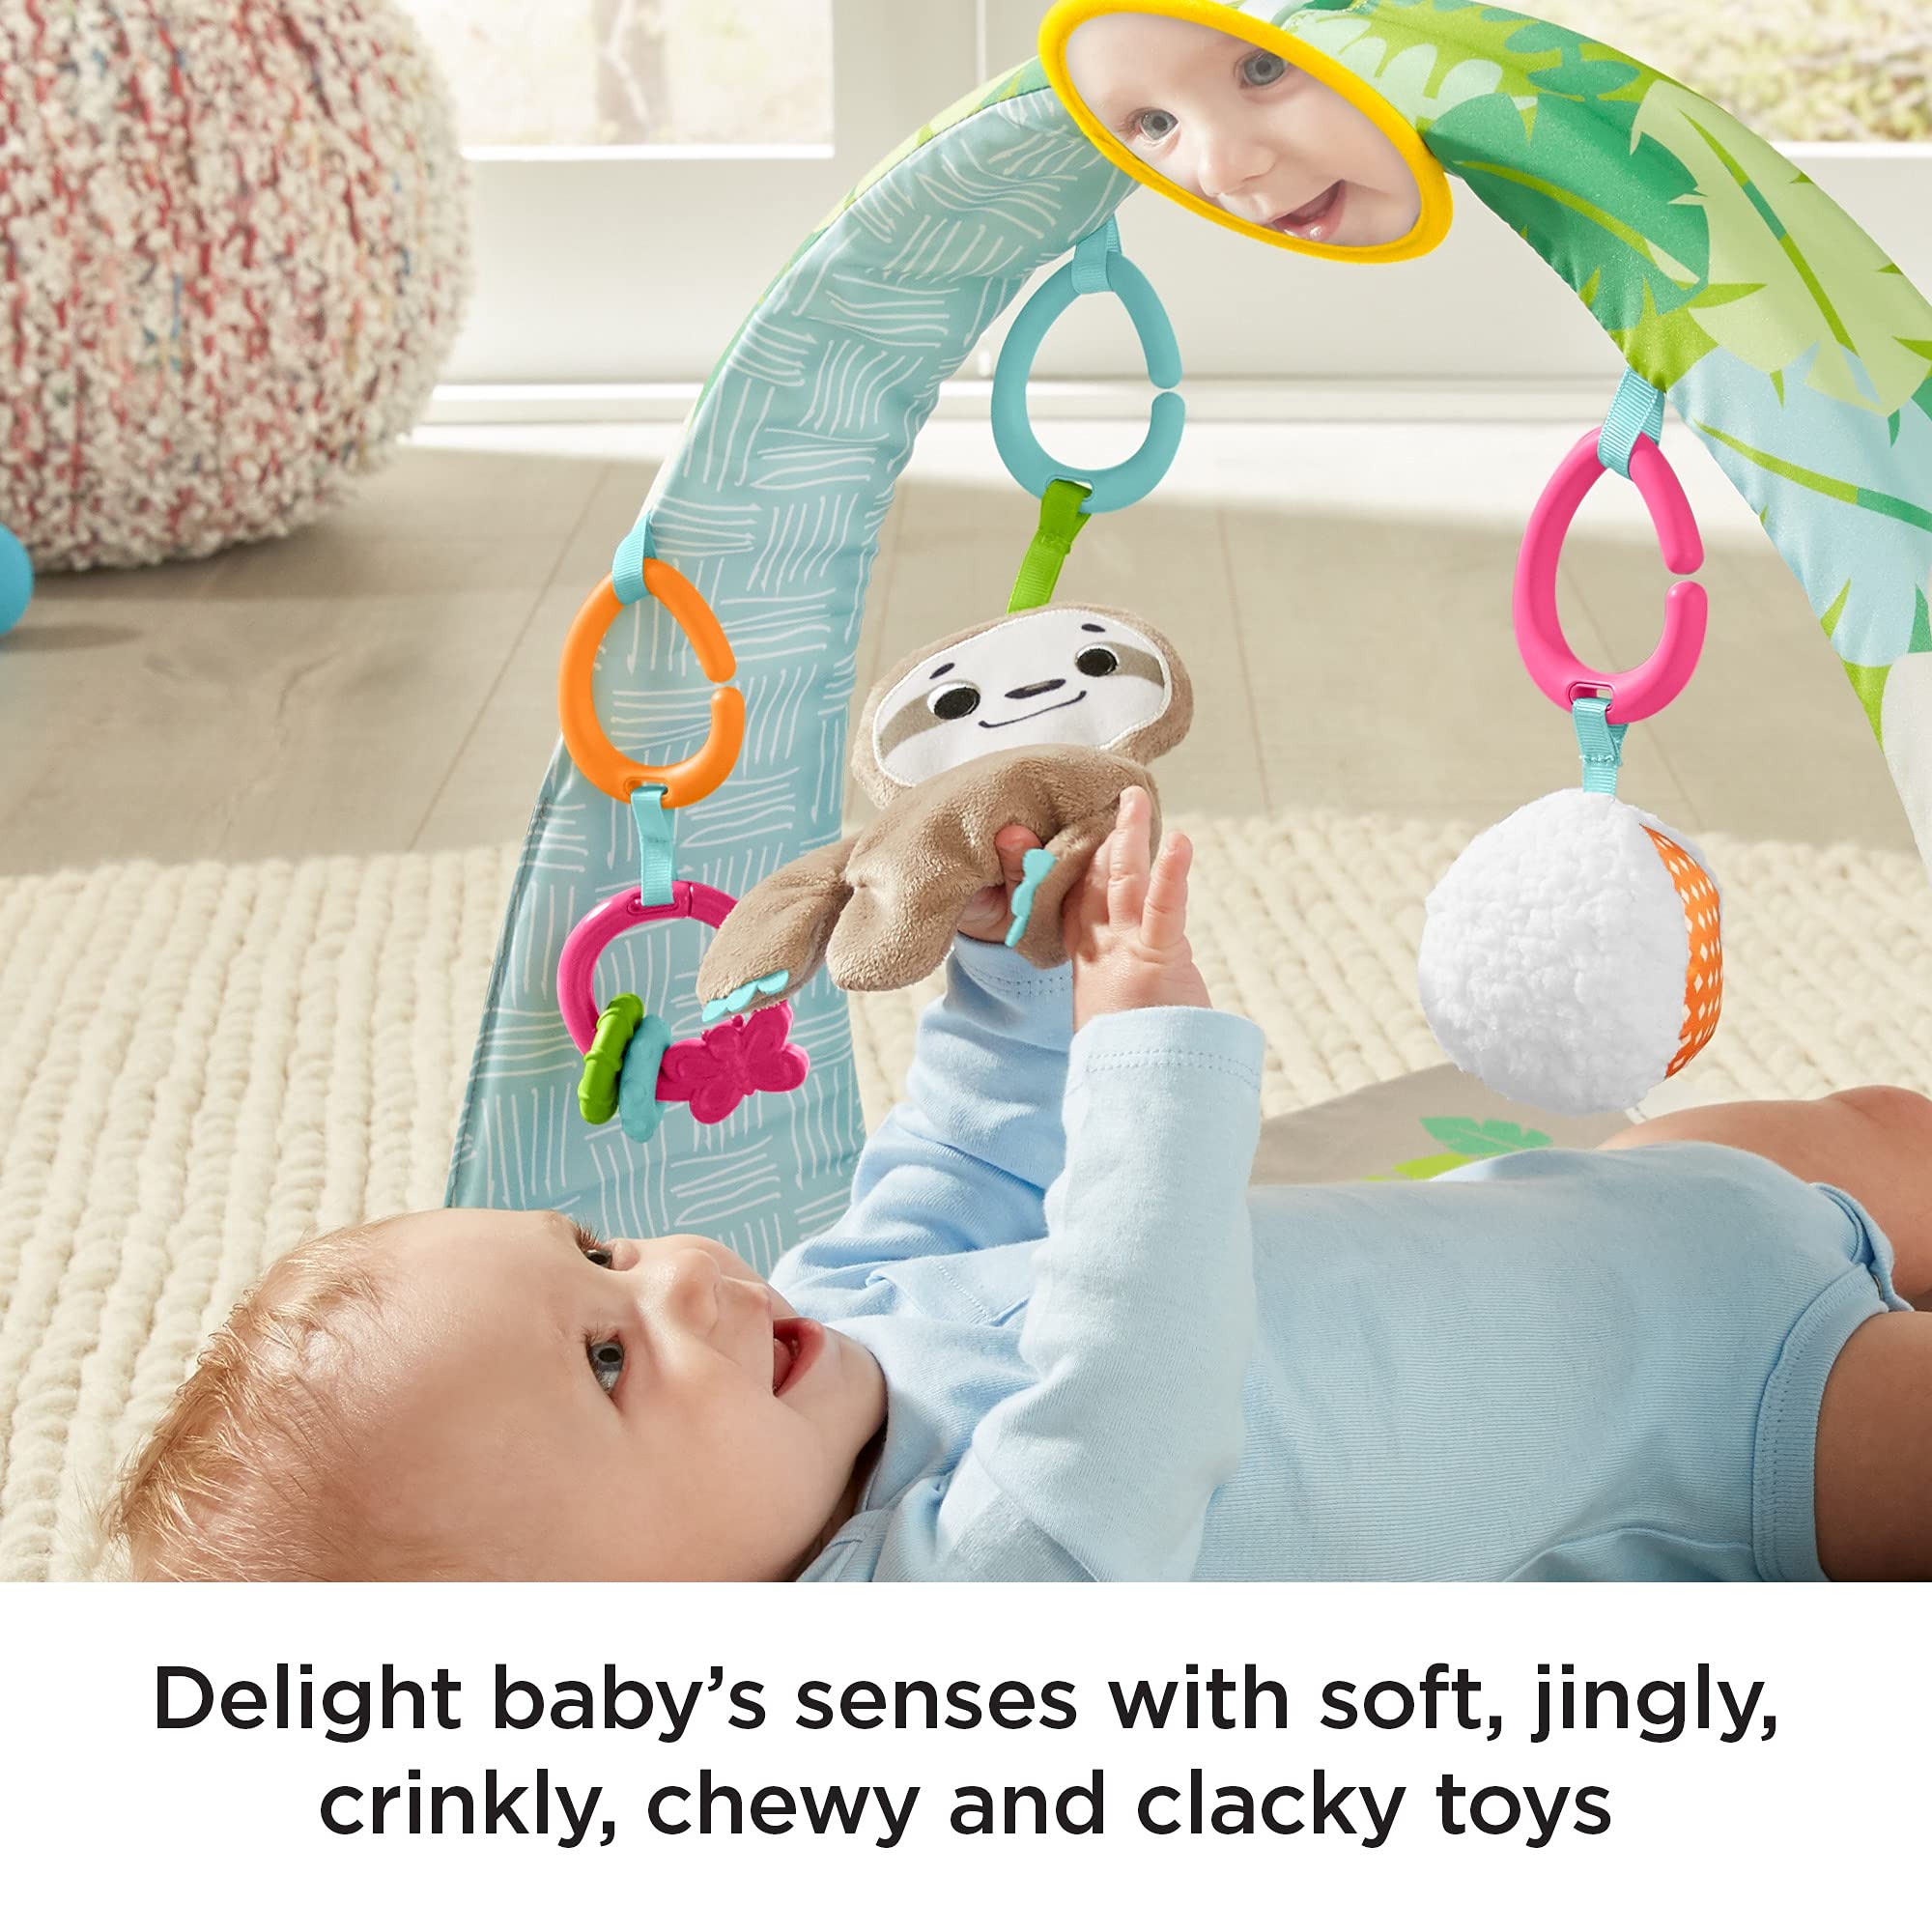 Fisher-Price Ready to Hang Sensory Sloth Gym, infant activity mat with toys for tummy time and play